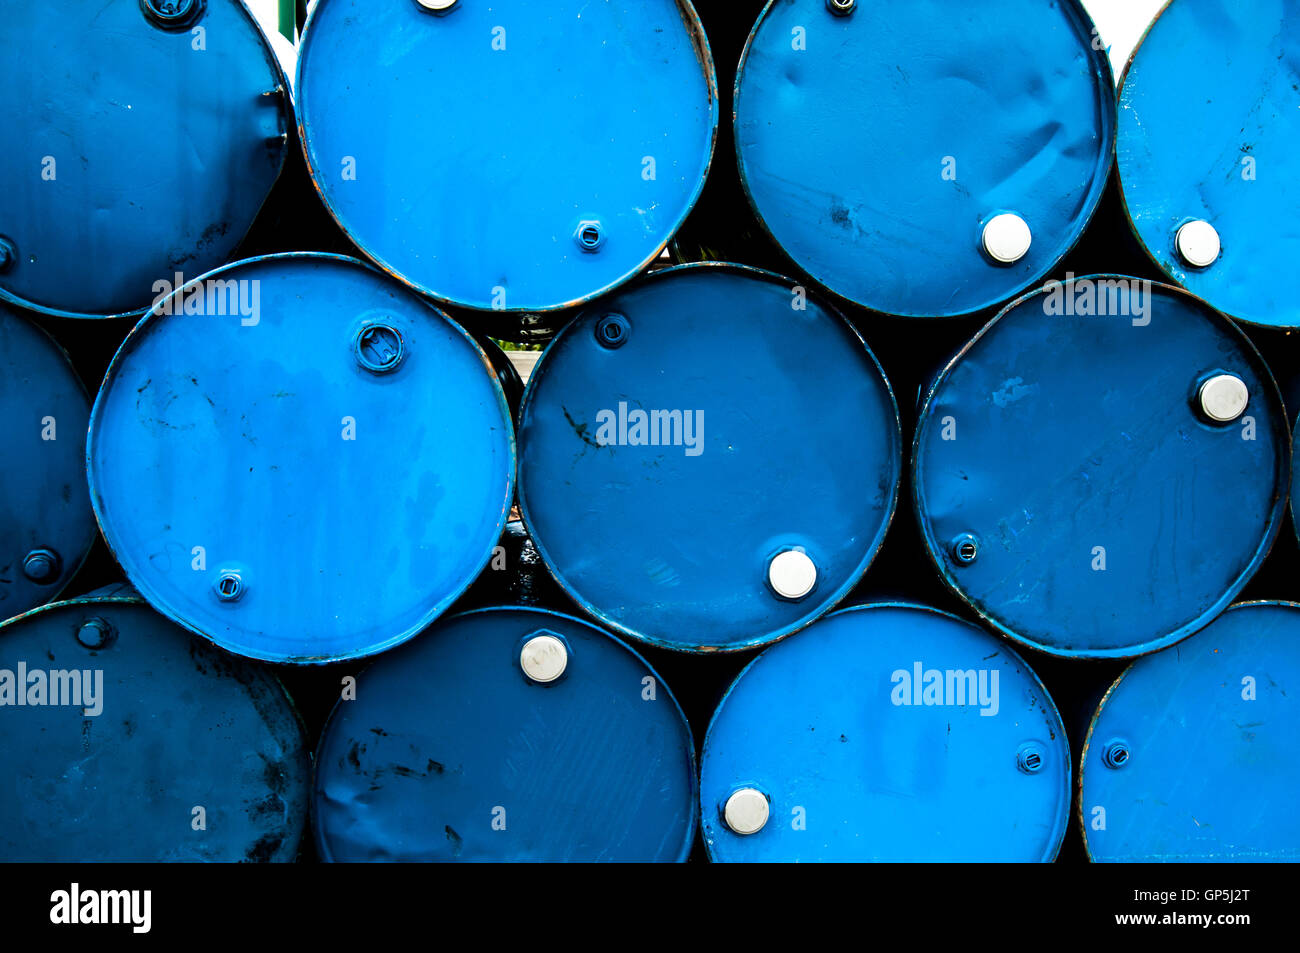 oil barrels or chemical drums stacked up Stock Photo